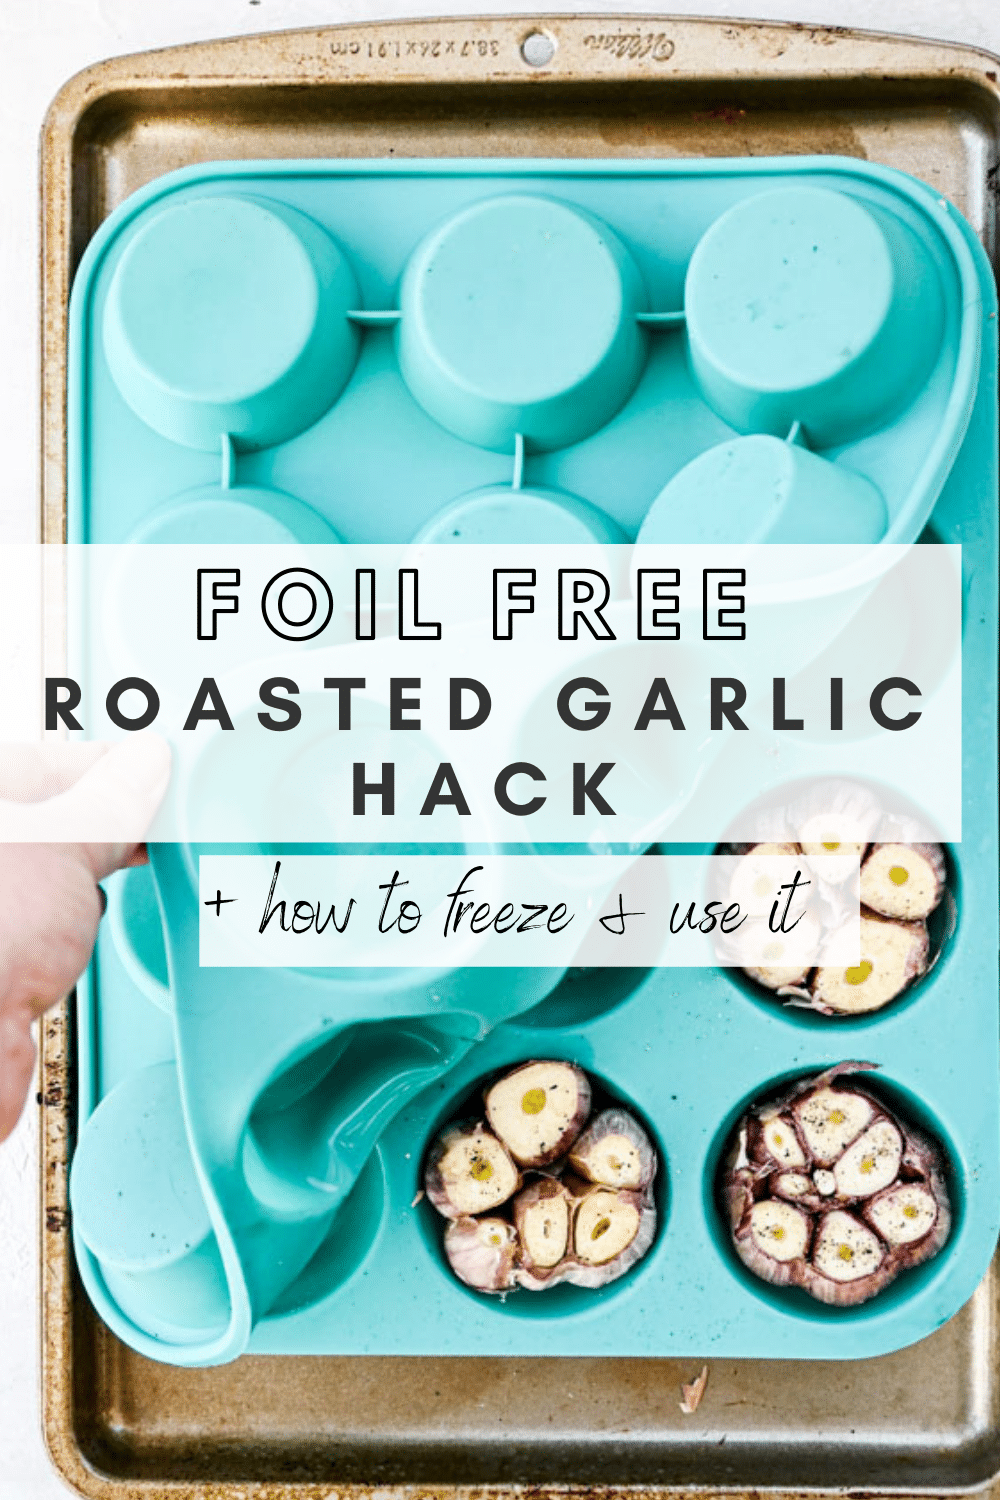 The no foil roasted garlic hack you need! (+ how to freeze it and what to do with it!)